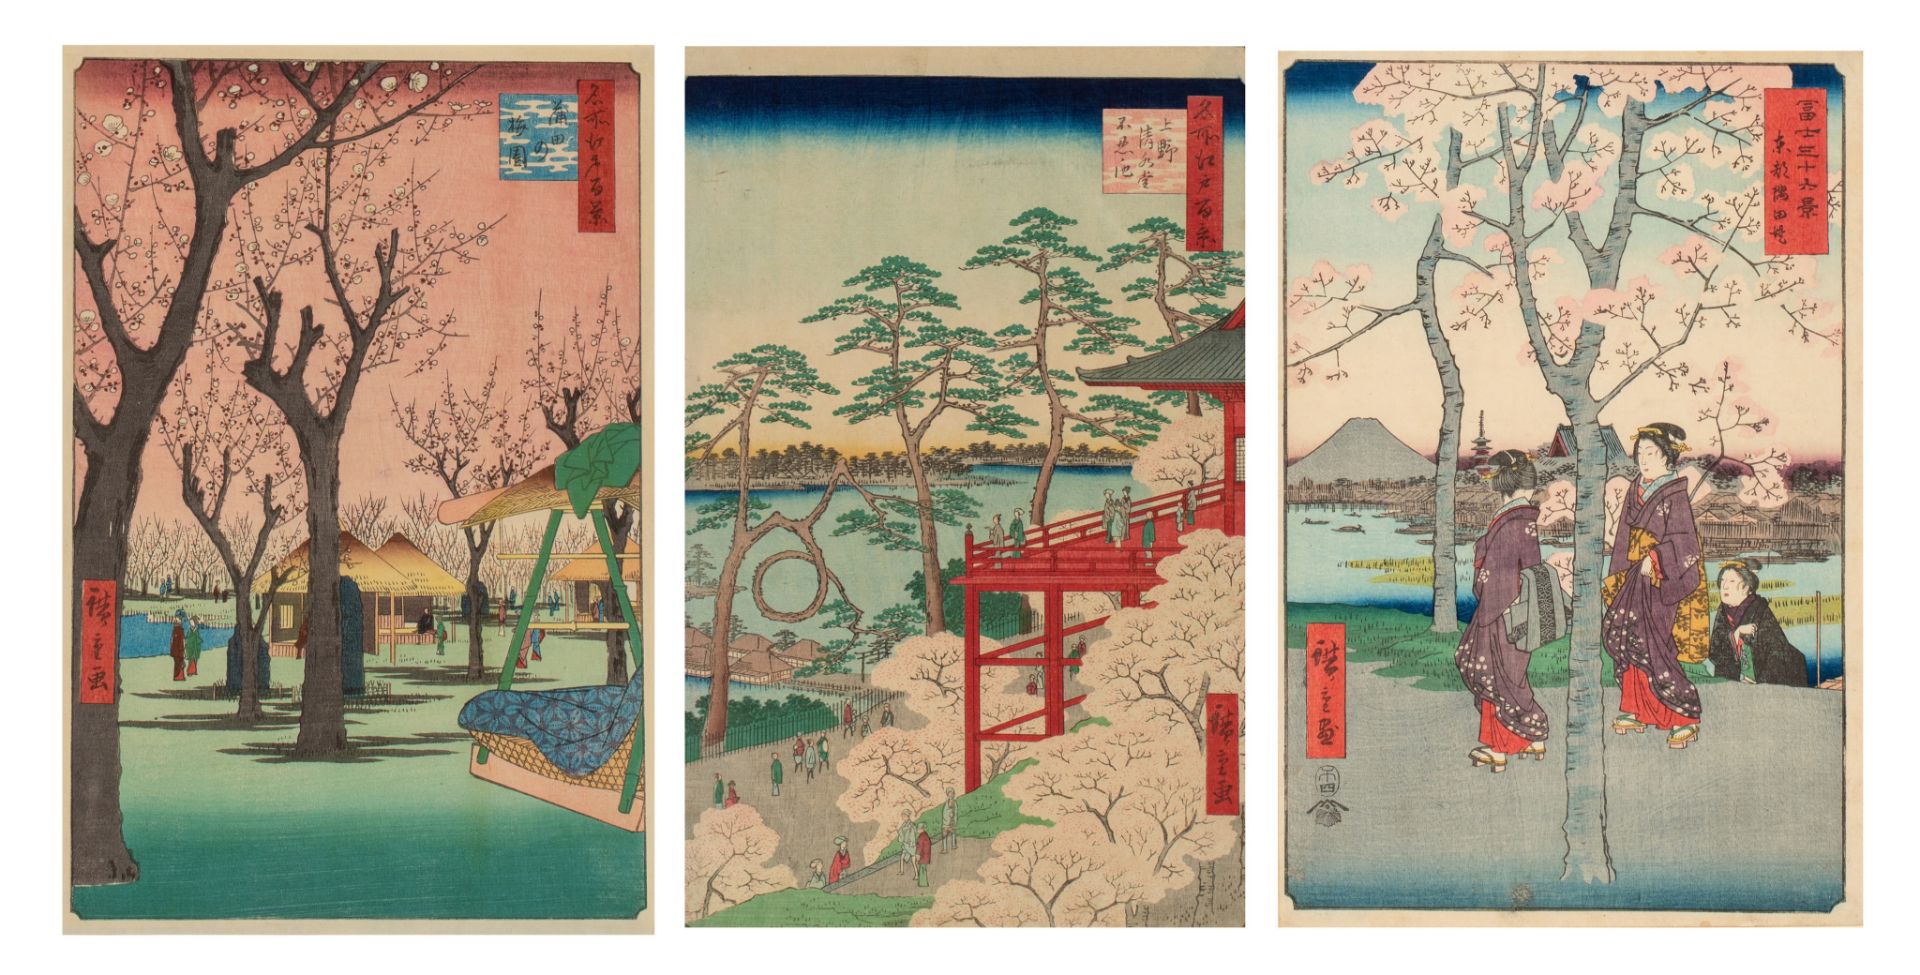 Three Japanese woodblock prints by Hiroshige, two from the series "100 views on Edo", no. 11 Kiyomit